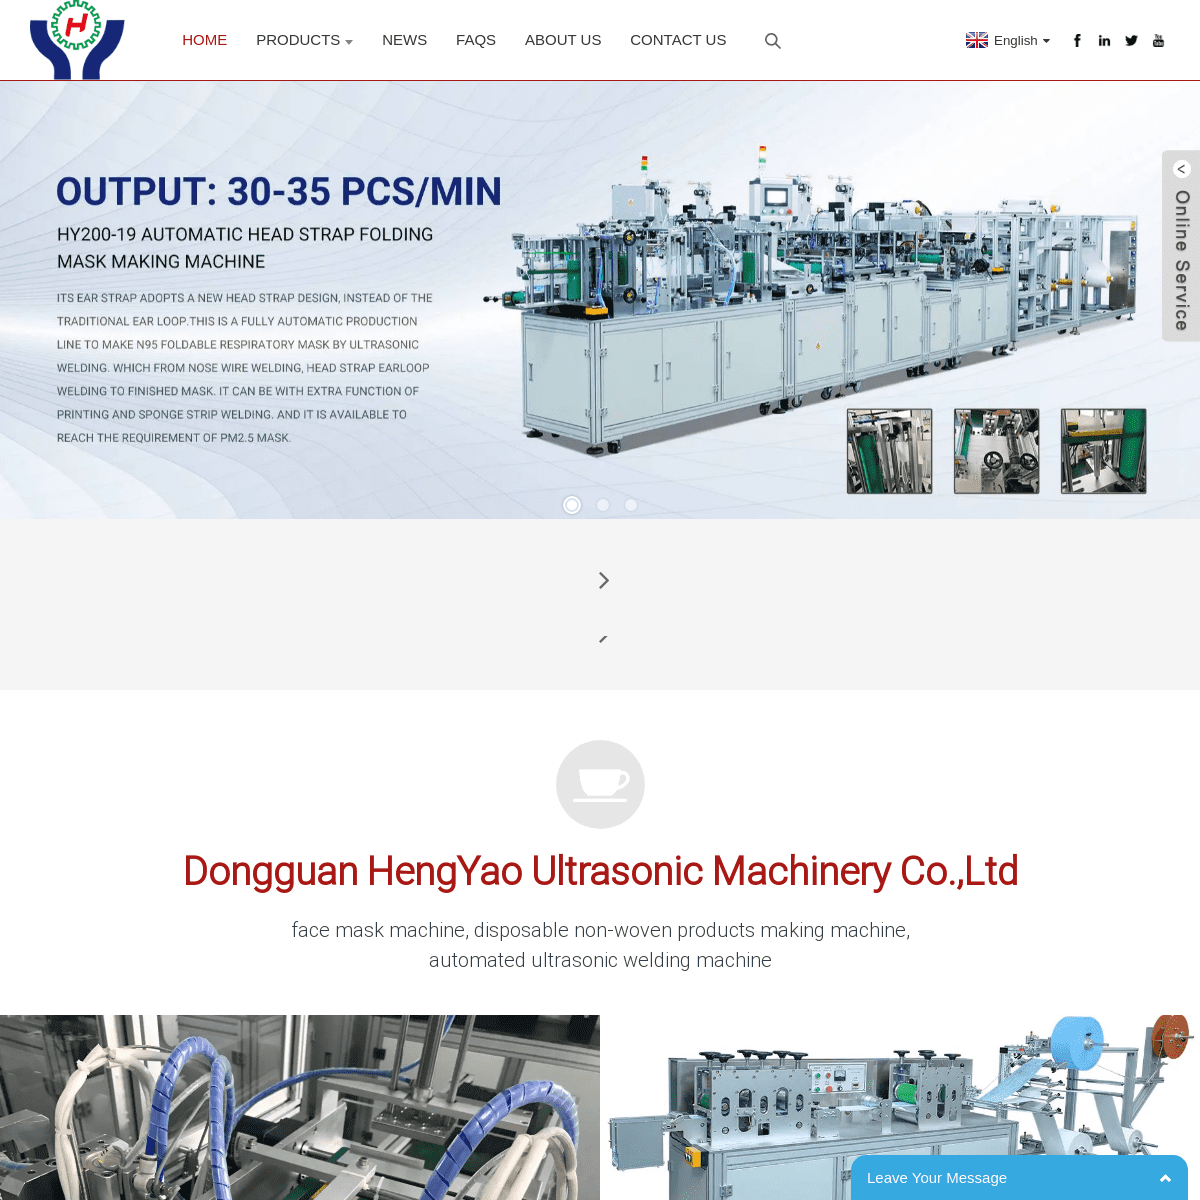 A complete backup of https://hengyaomachinery.com